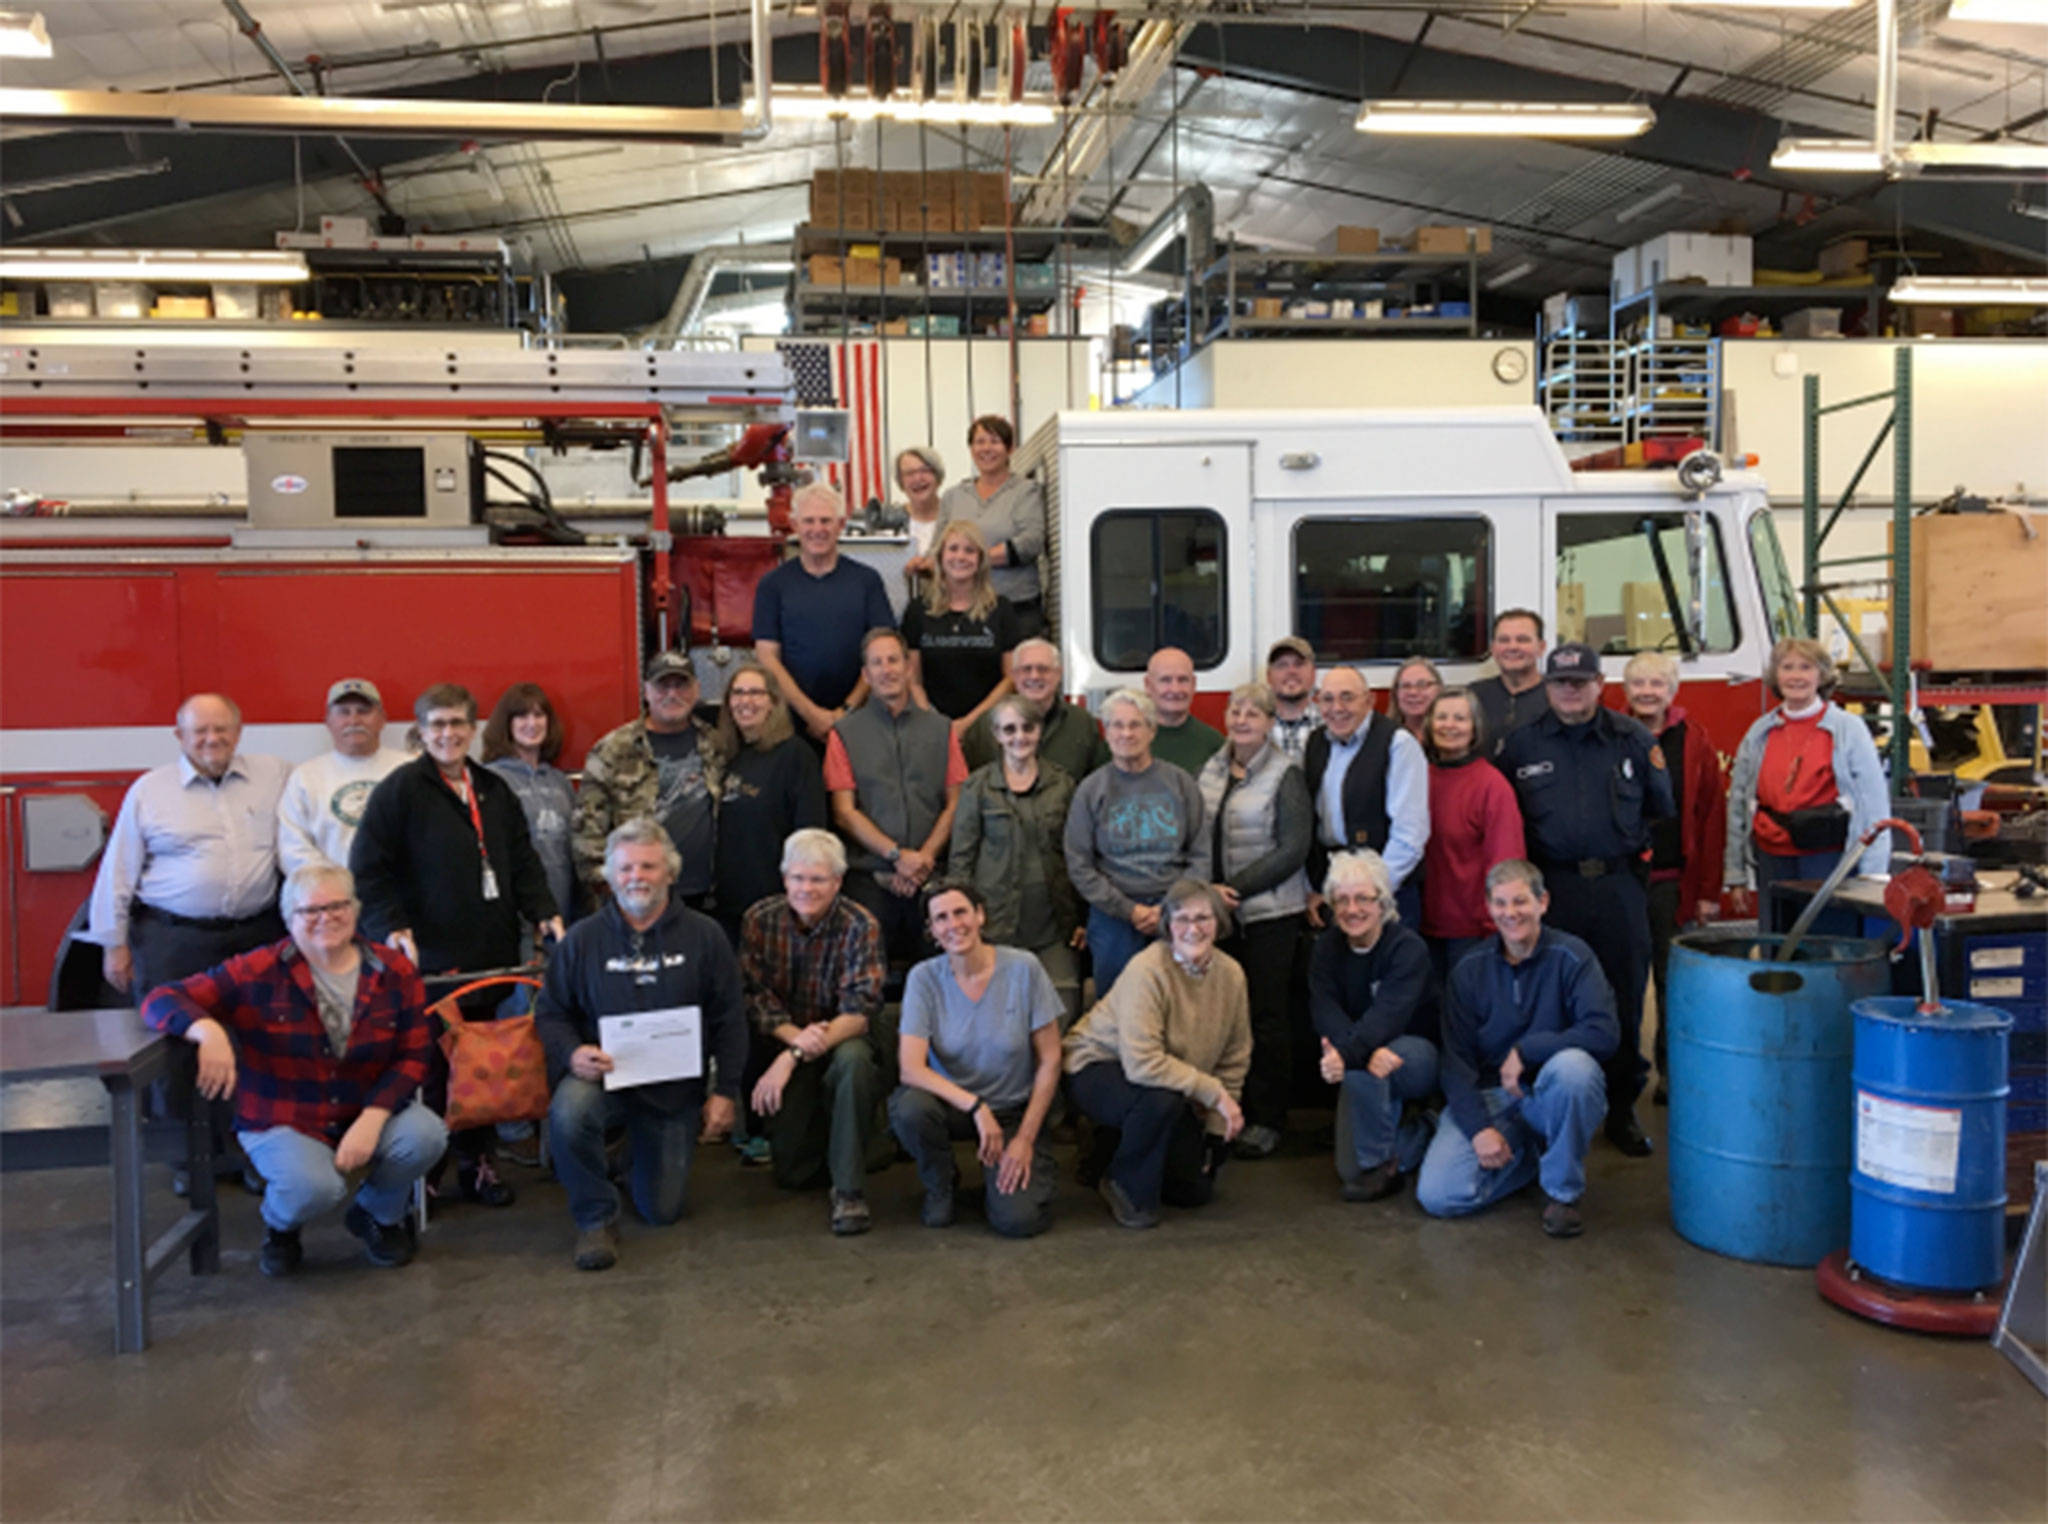 Locals trained for 24 hours over three Saturdays at Sequim Community Church on how to fight small fires, conduct search operations and conduct basic first aid in a disaster scenario for the CERT program. (Clallam County Fire District 3)